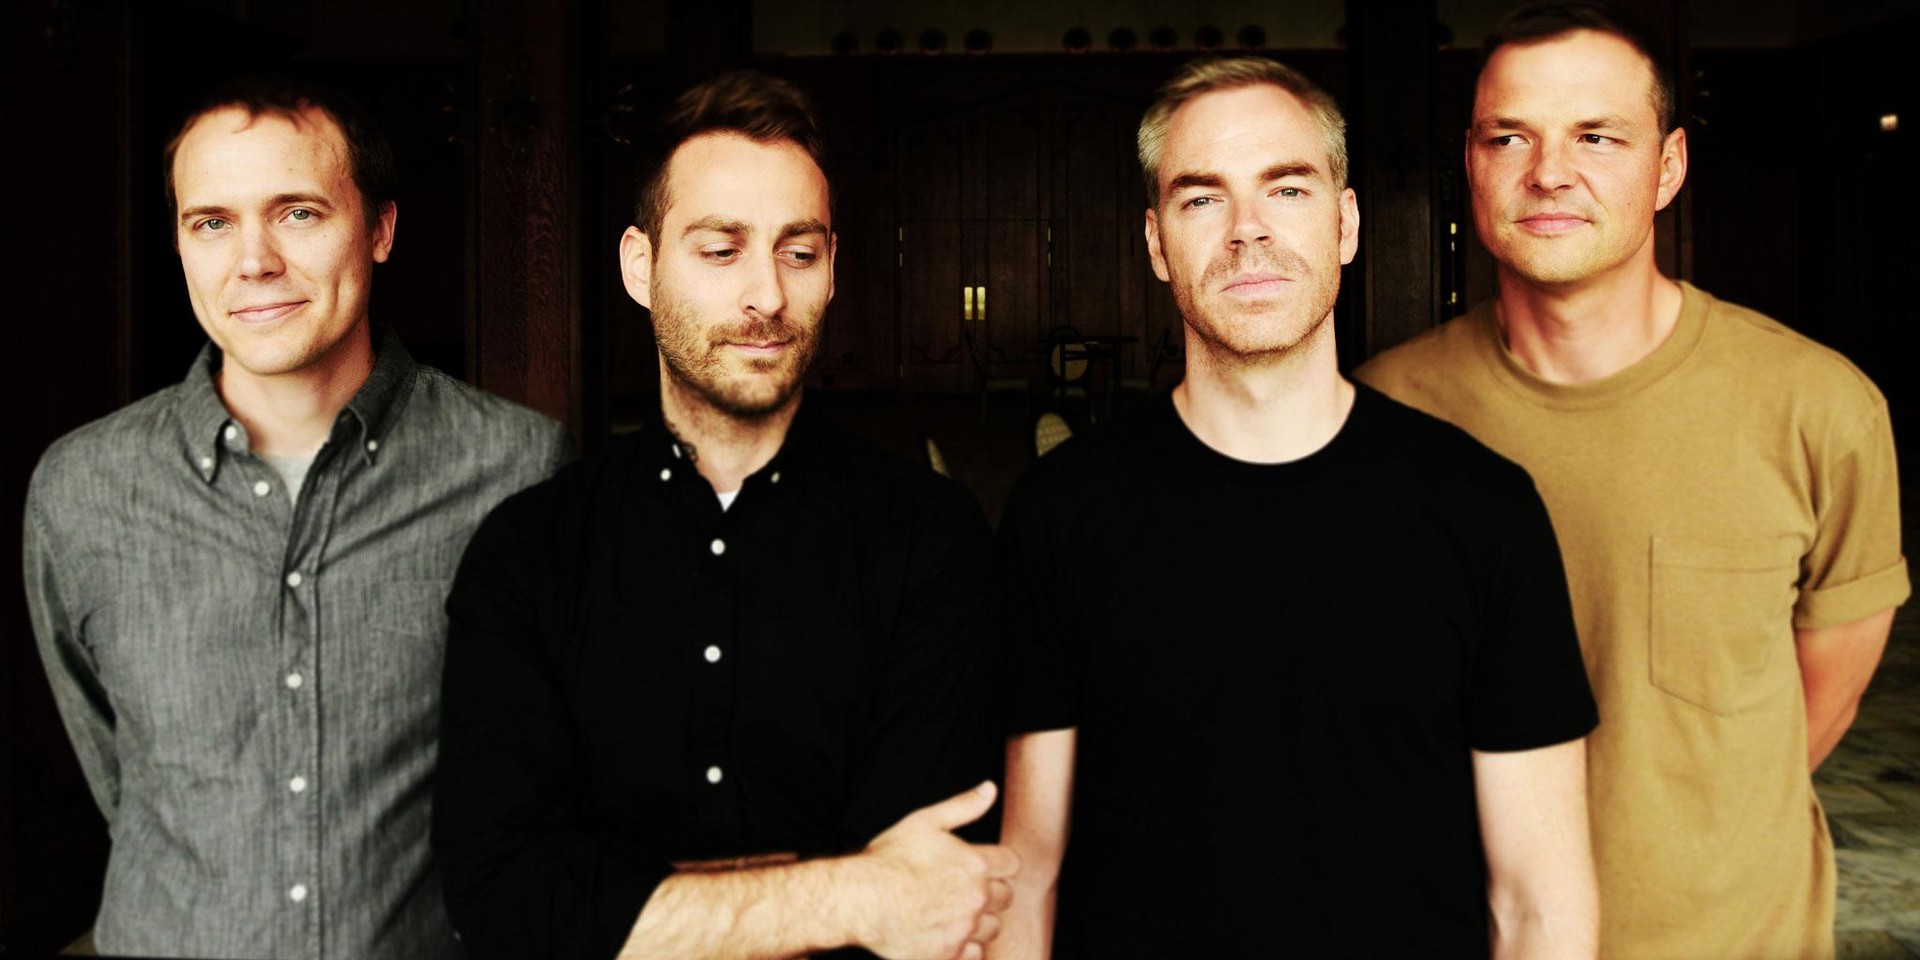 American Football perform with a children's choir for NPR's Tiny Desk concert – watch